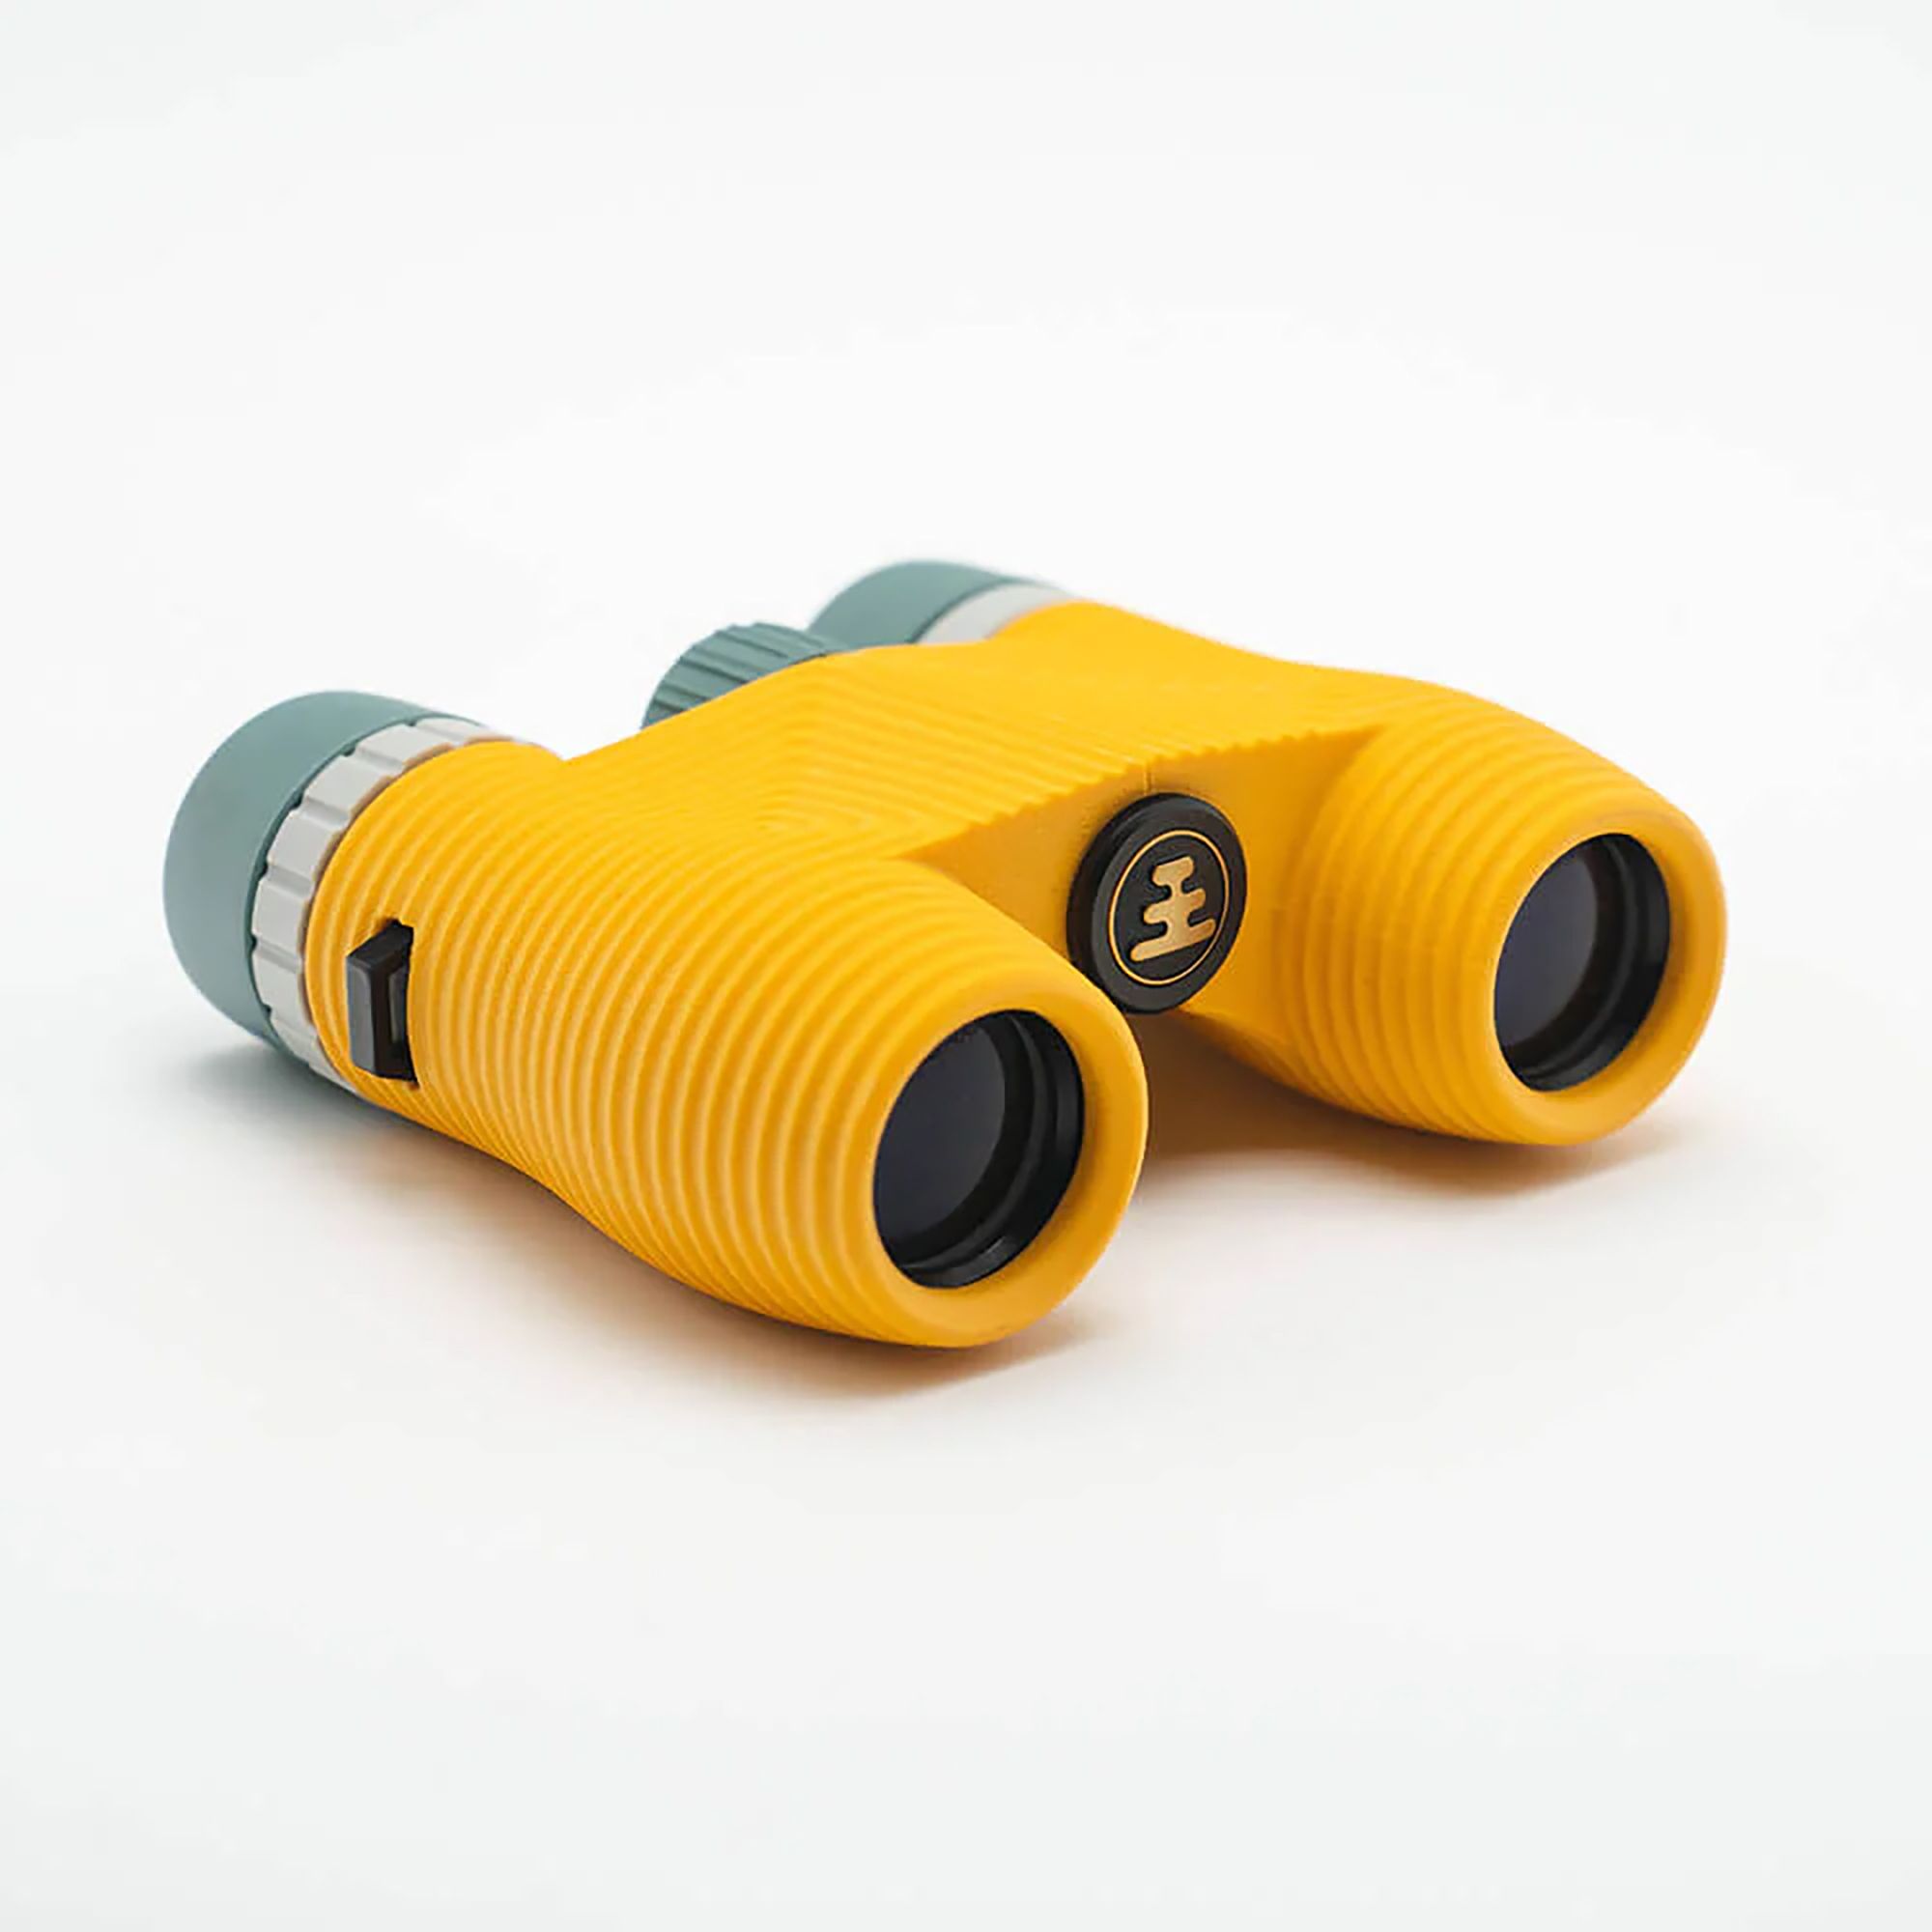 Photos - Other Nocs Provisions Standard Issue 8x25 Binoculars, Full Size, Canary Yellow 2 